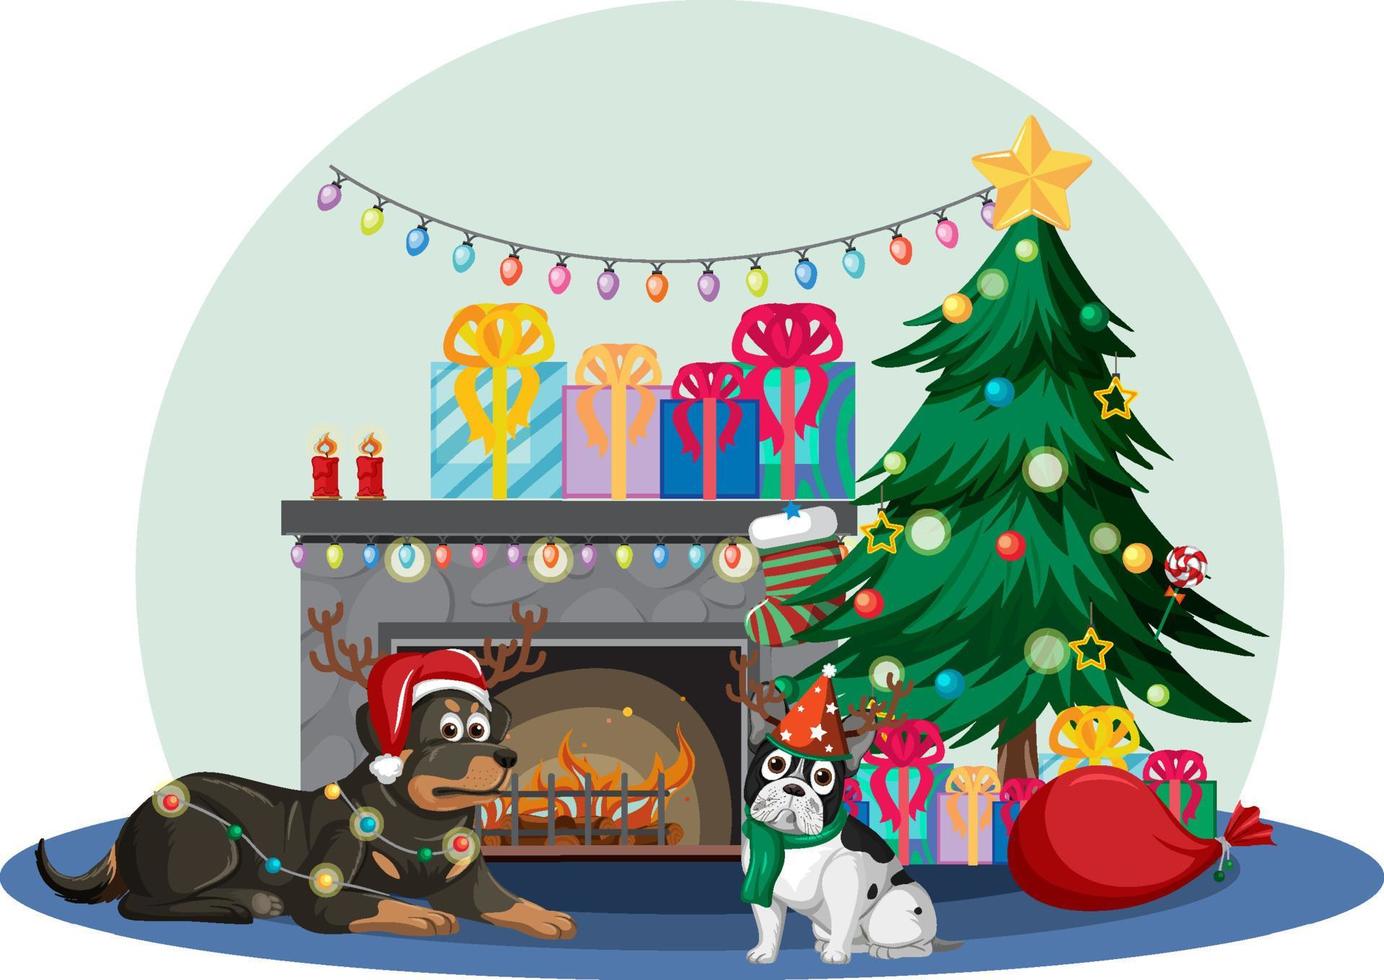 Fireplace with decorative objects in Christmas theme vector